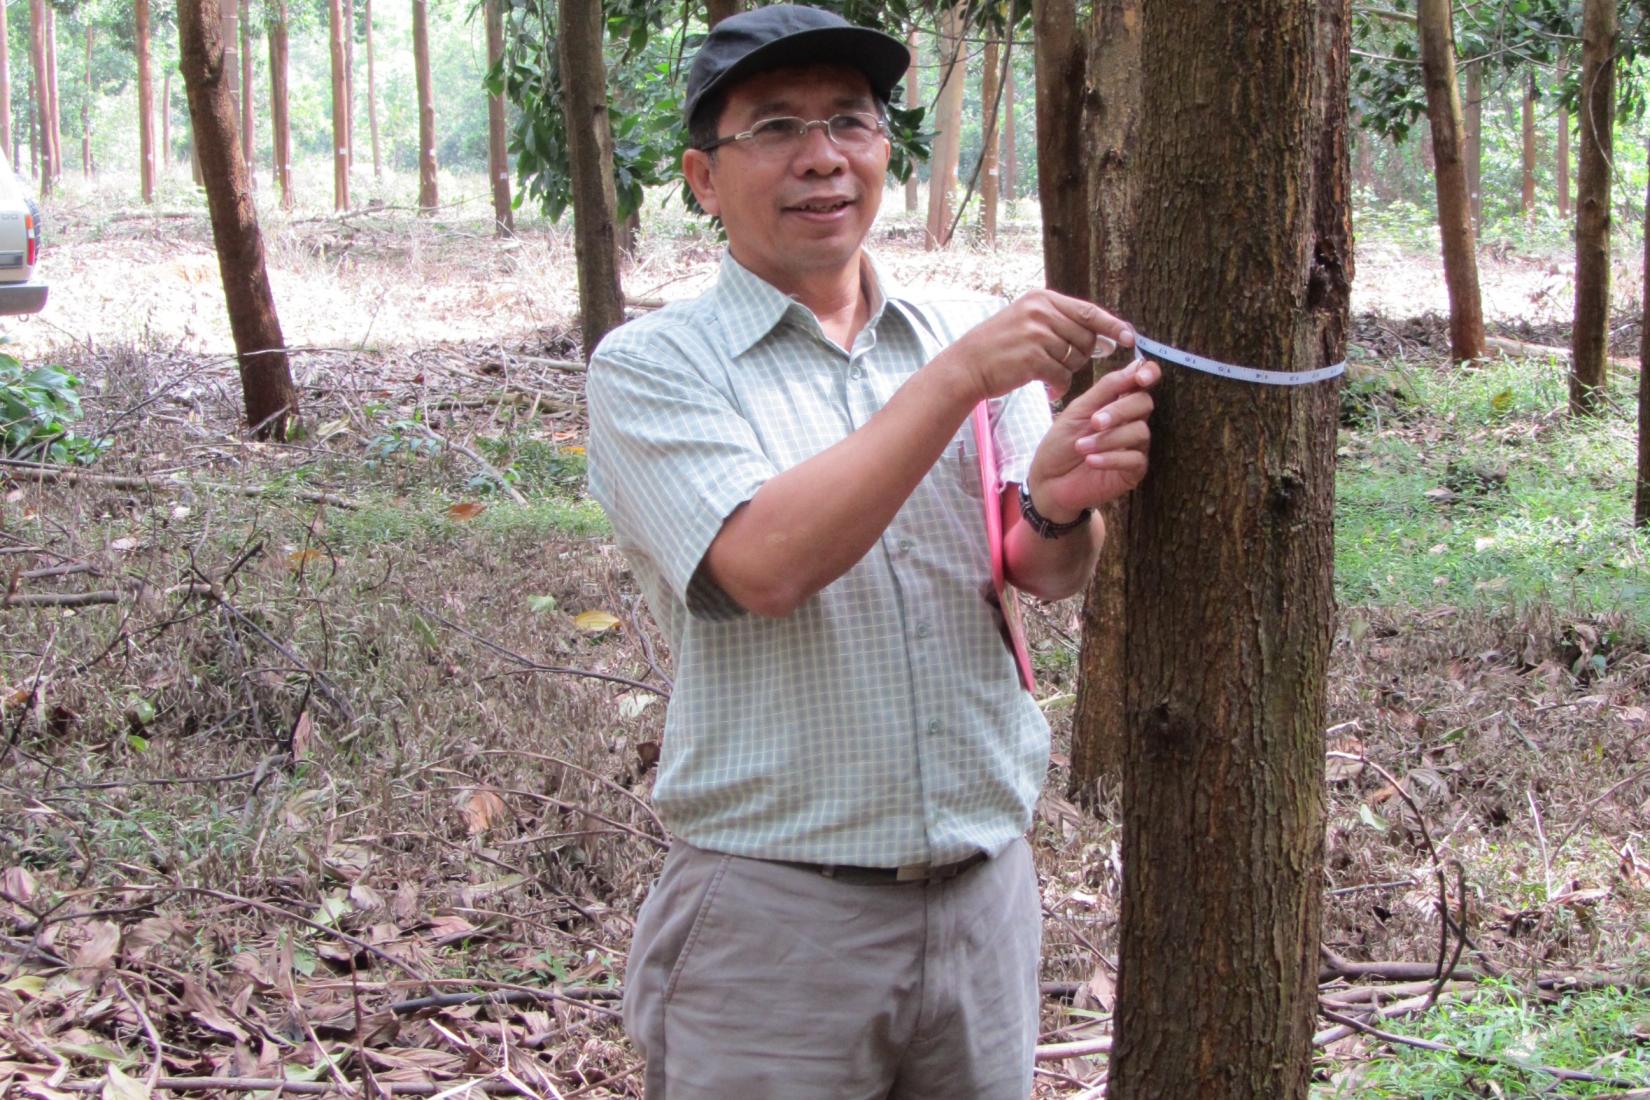 A man measures a tree trunk